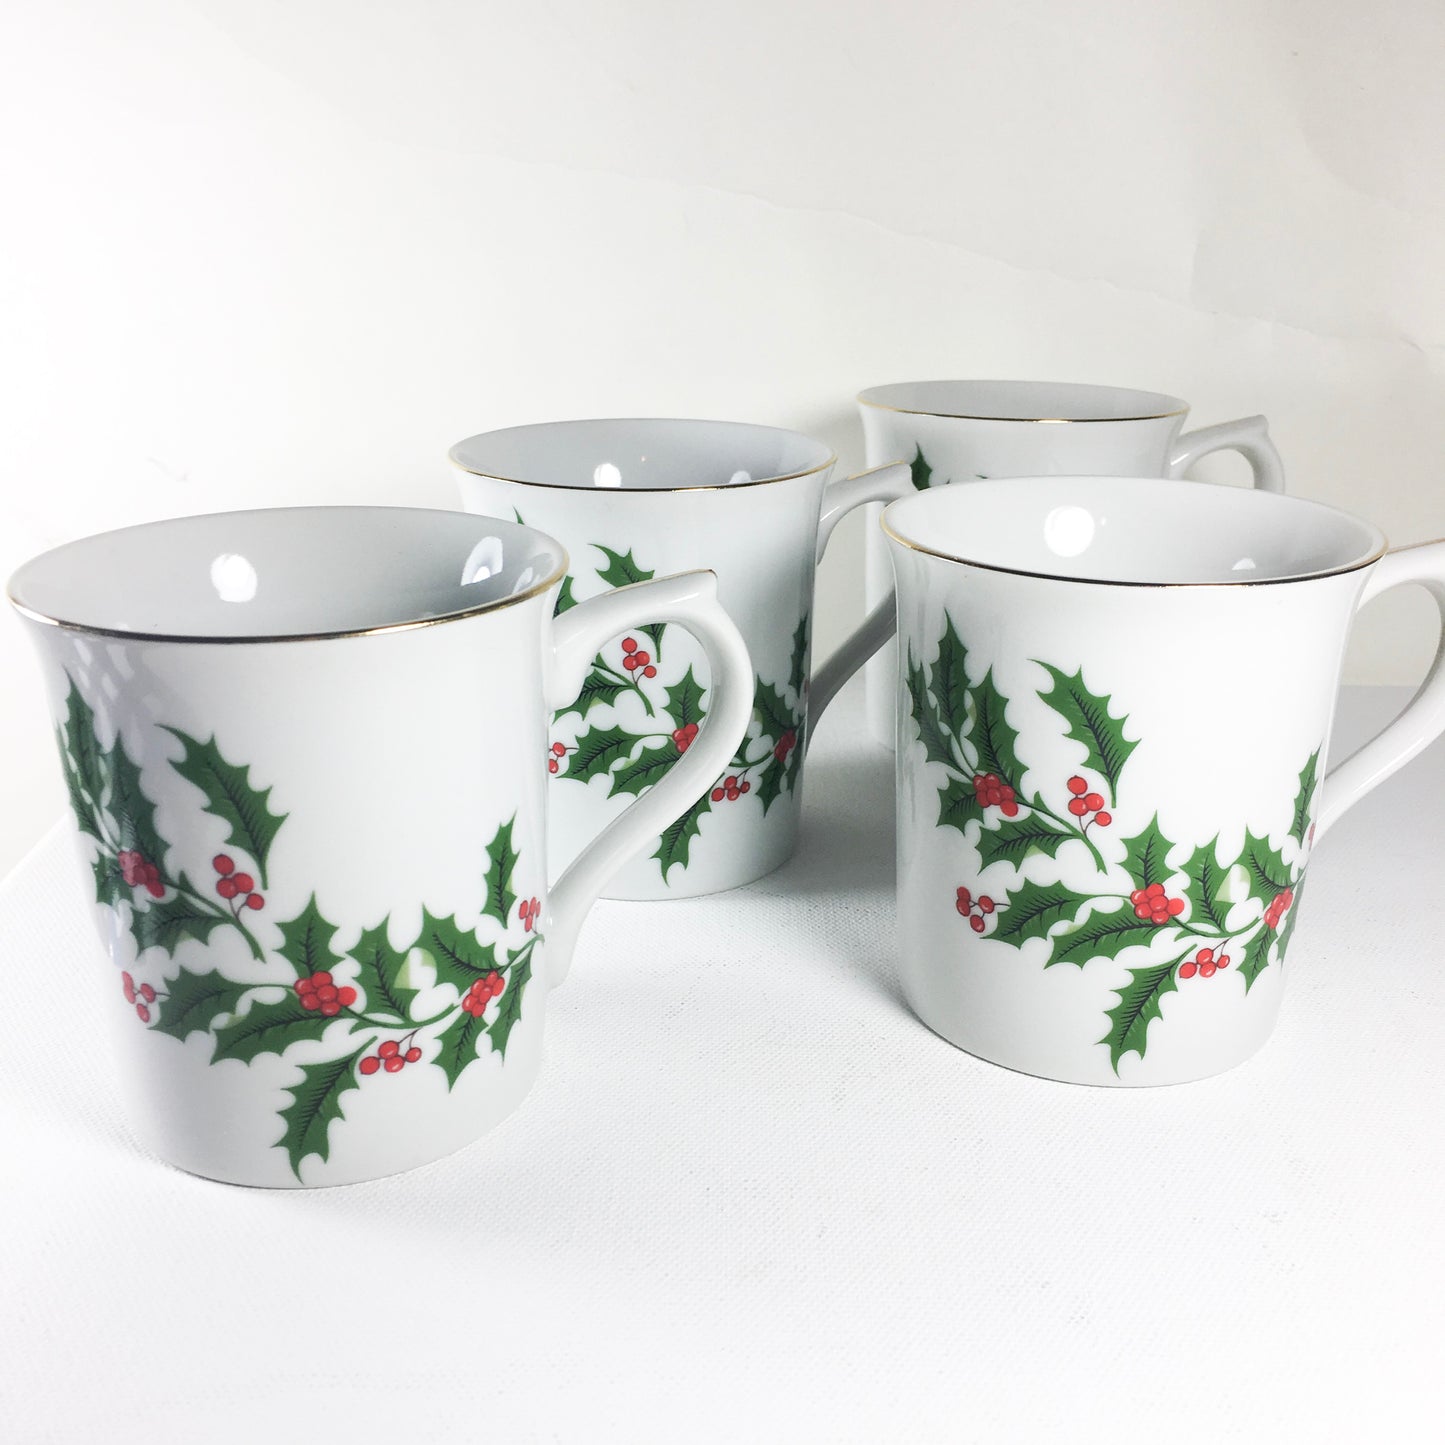 Set of four vintage porcelain holiday mugs, the Trimmings, Christmas Decor